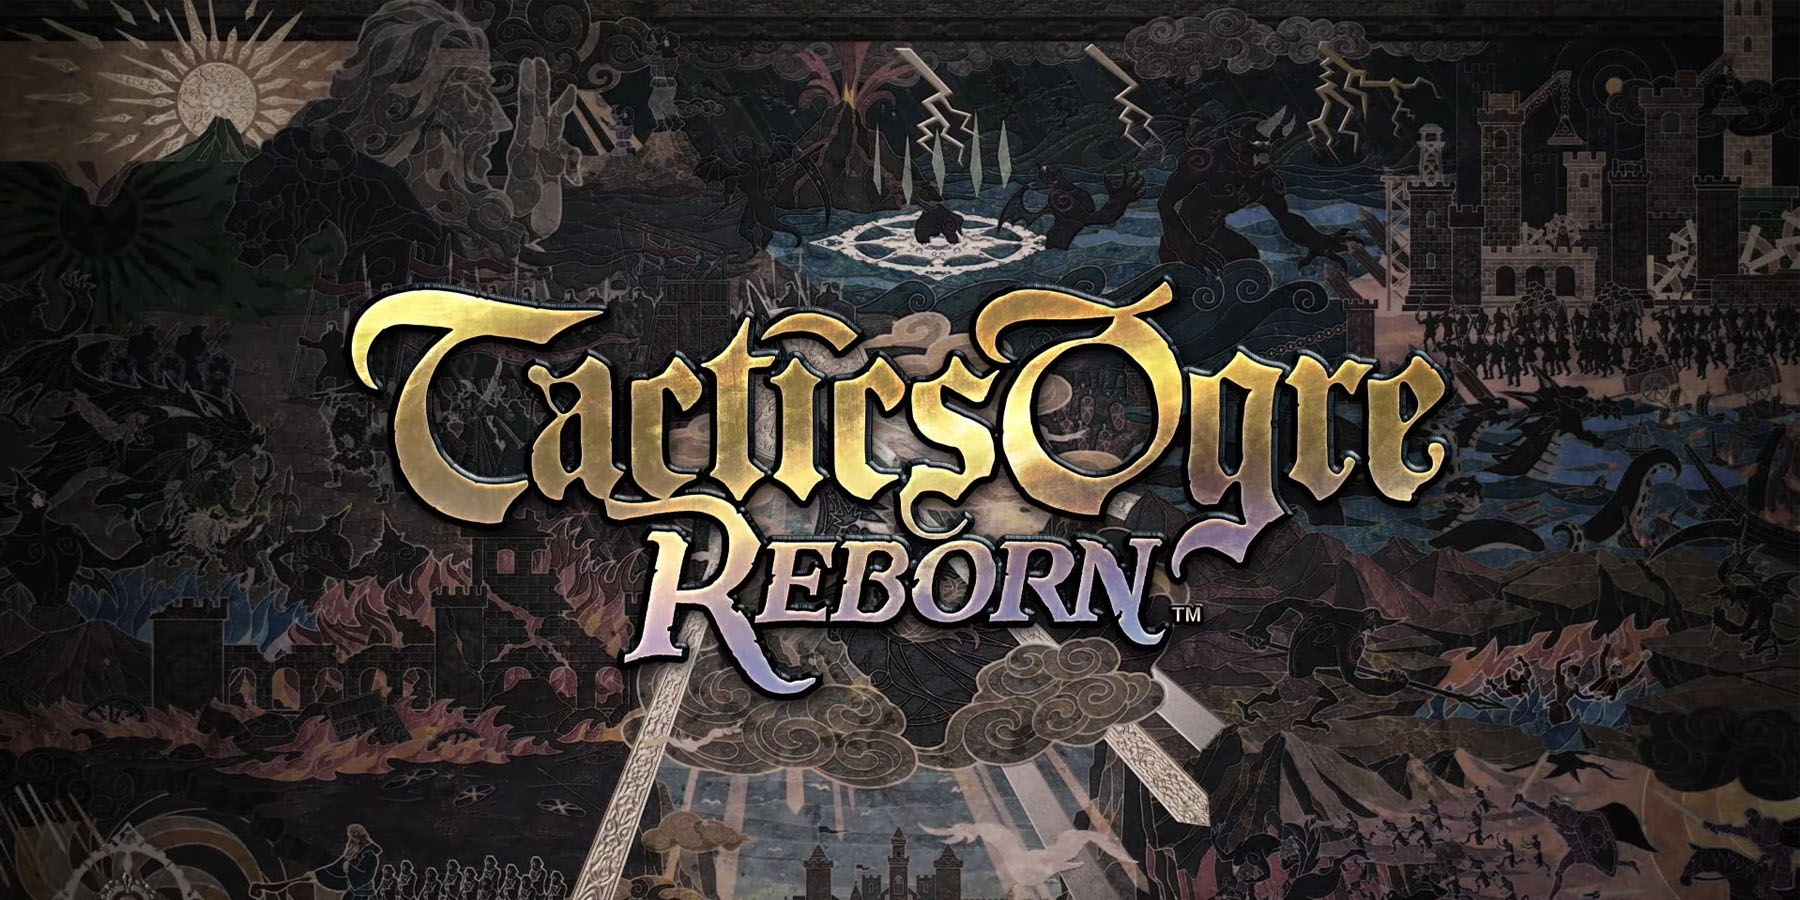 Square Enix Releases Story Trailer For Tactics Ogre: Reborn
Before Launch